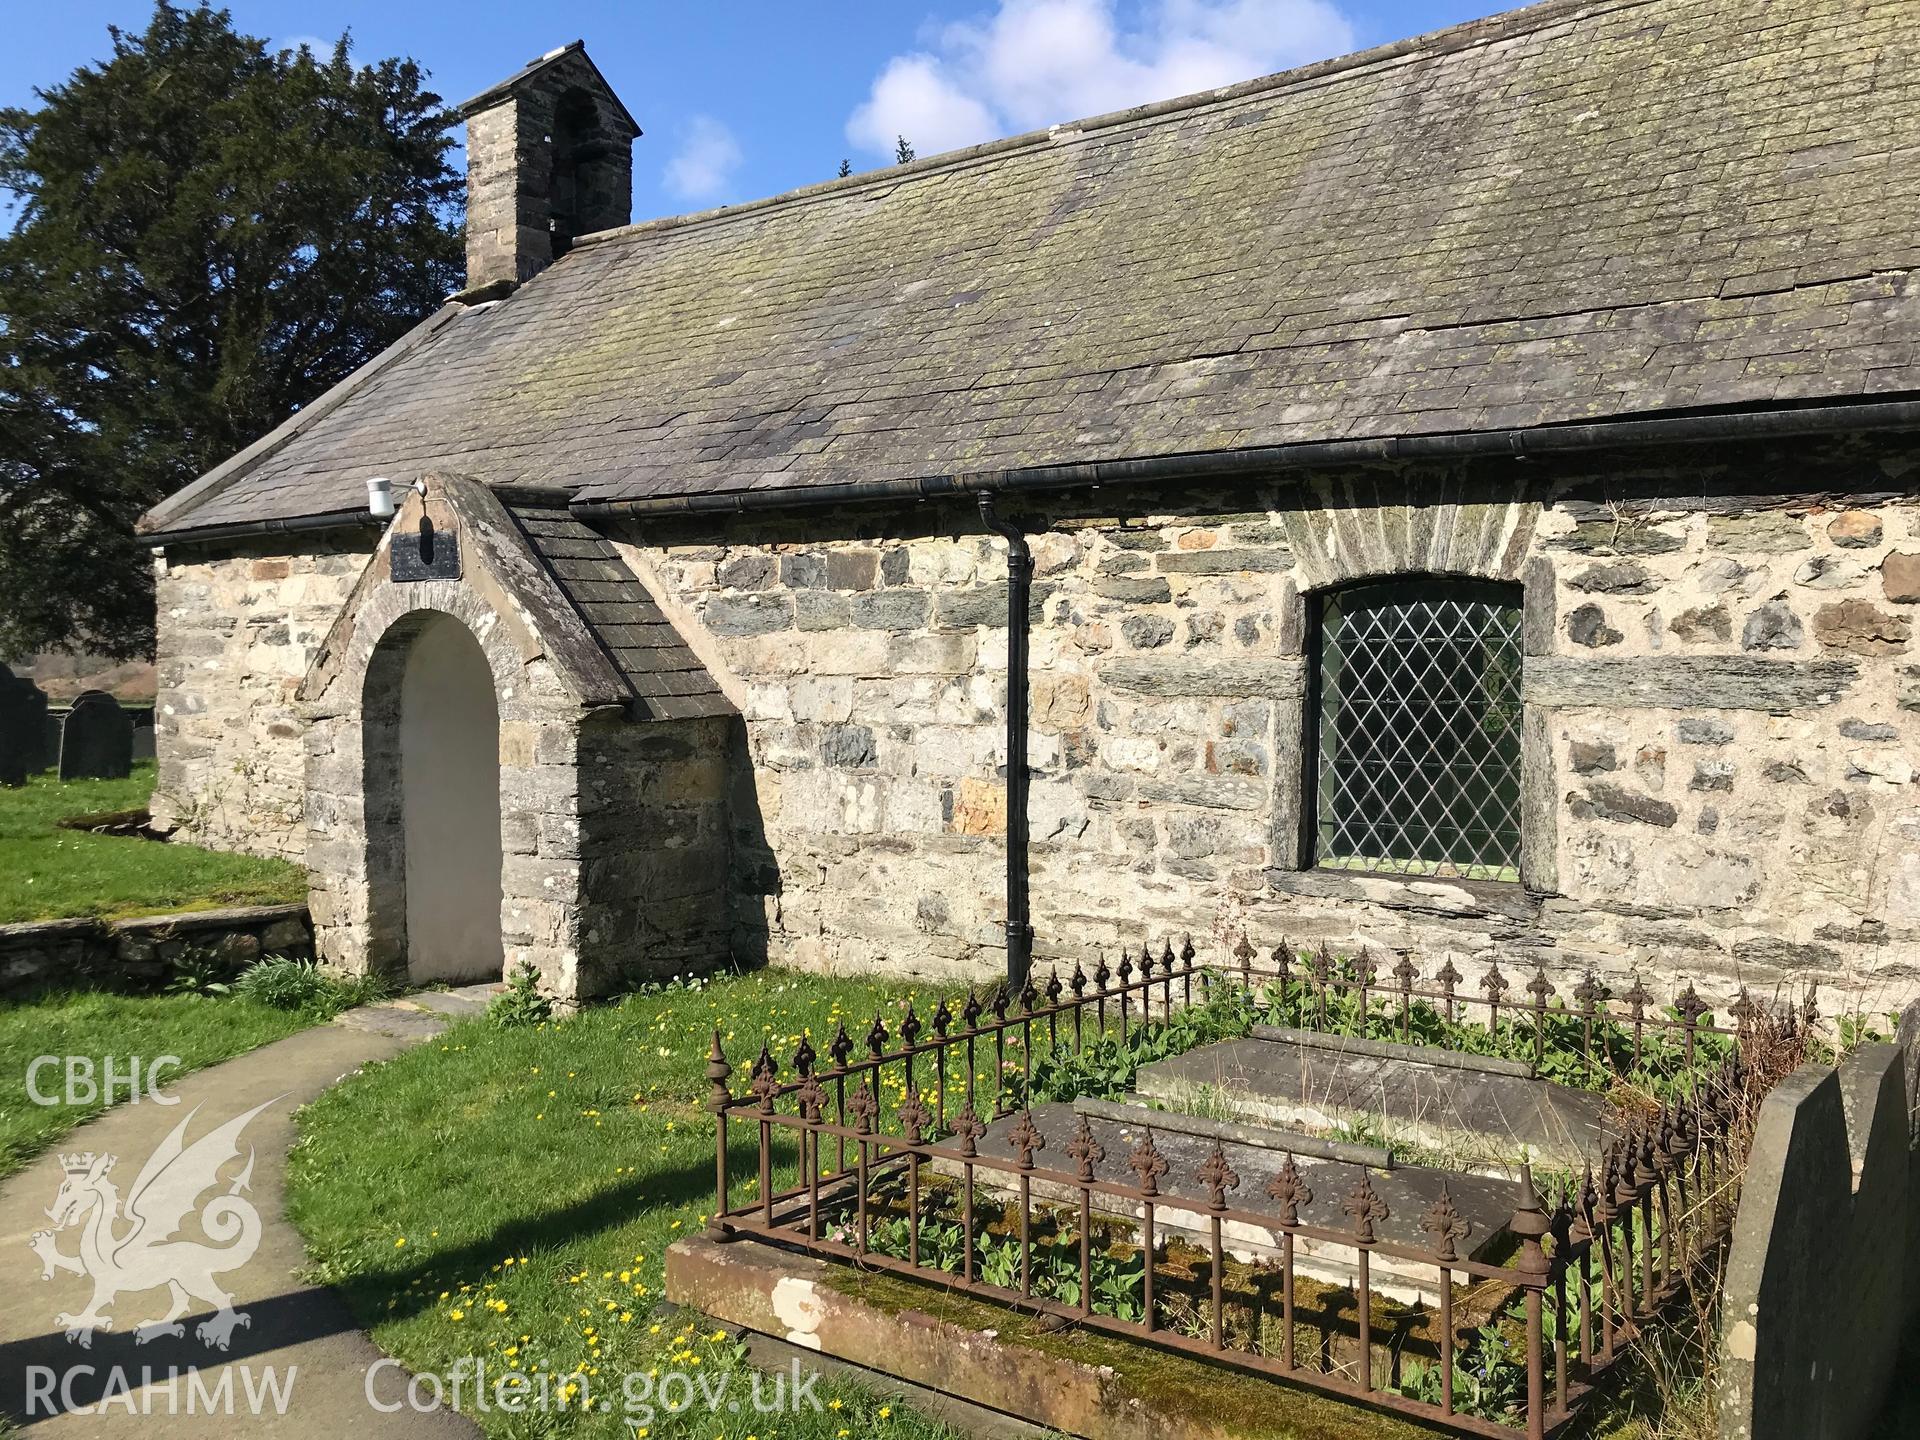 Colour photograph showing exterior view of Eglwys Mihangel (St. Michael's Church) including entrance porch, Llanfihangel-y-Pennant, taken by Paul R. Davis on 28th March 2019.